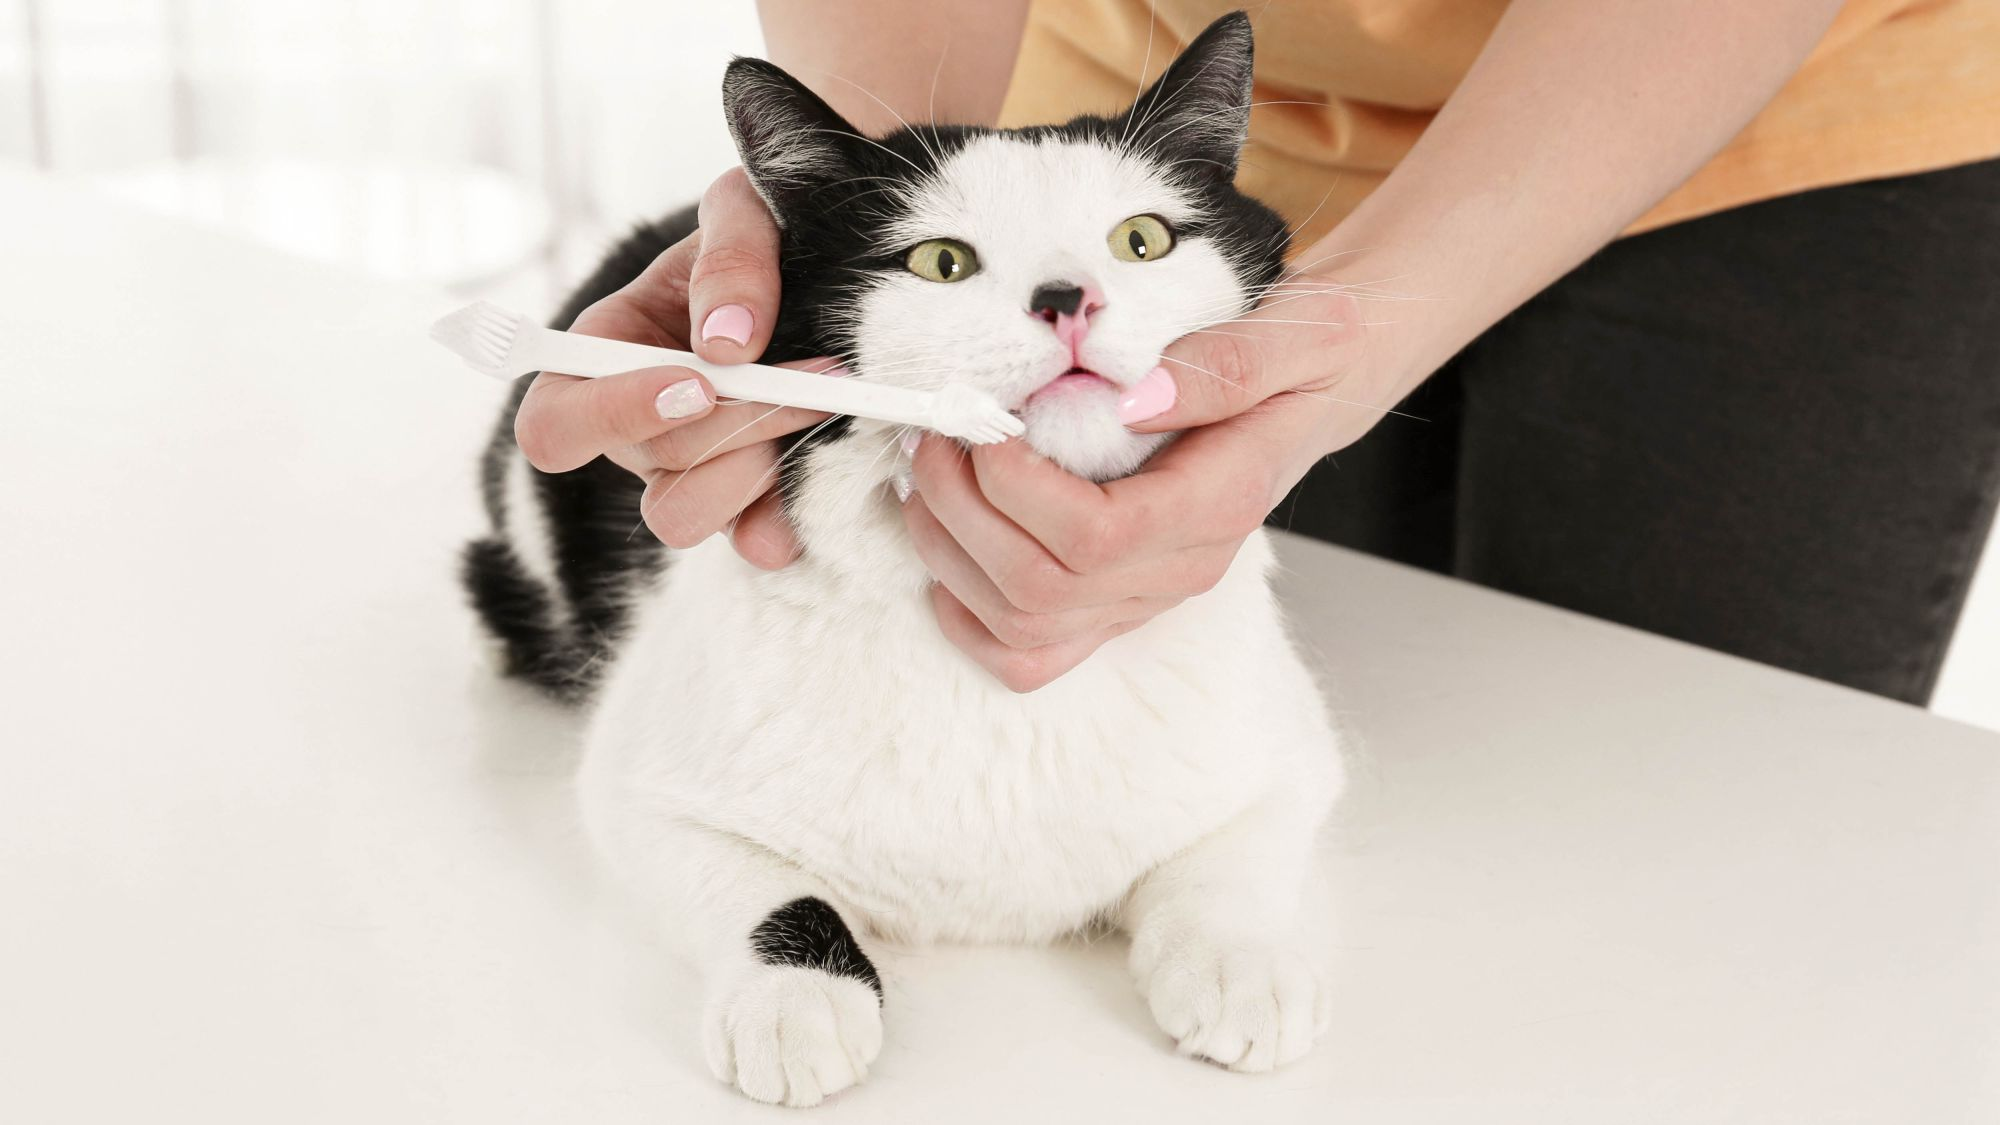 Black and white cat getting teeth cleaned